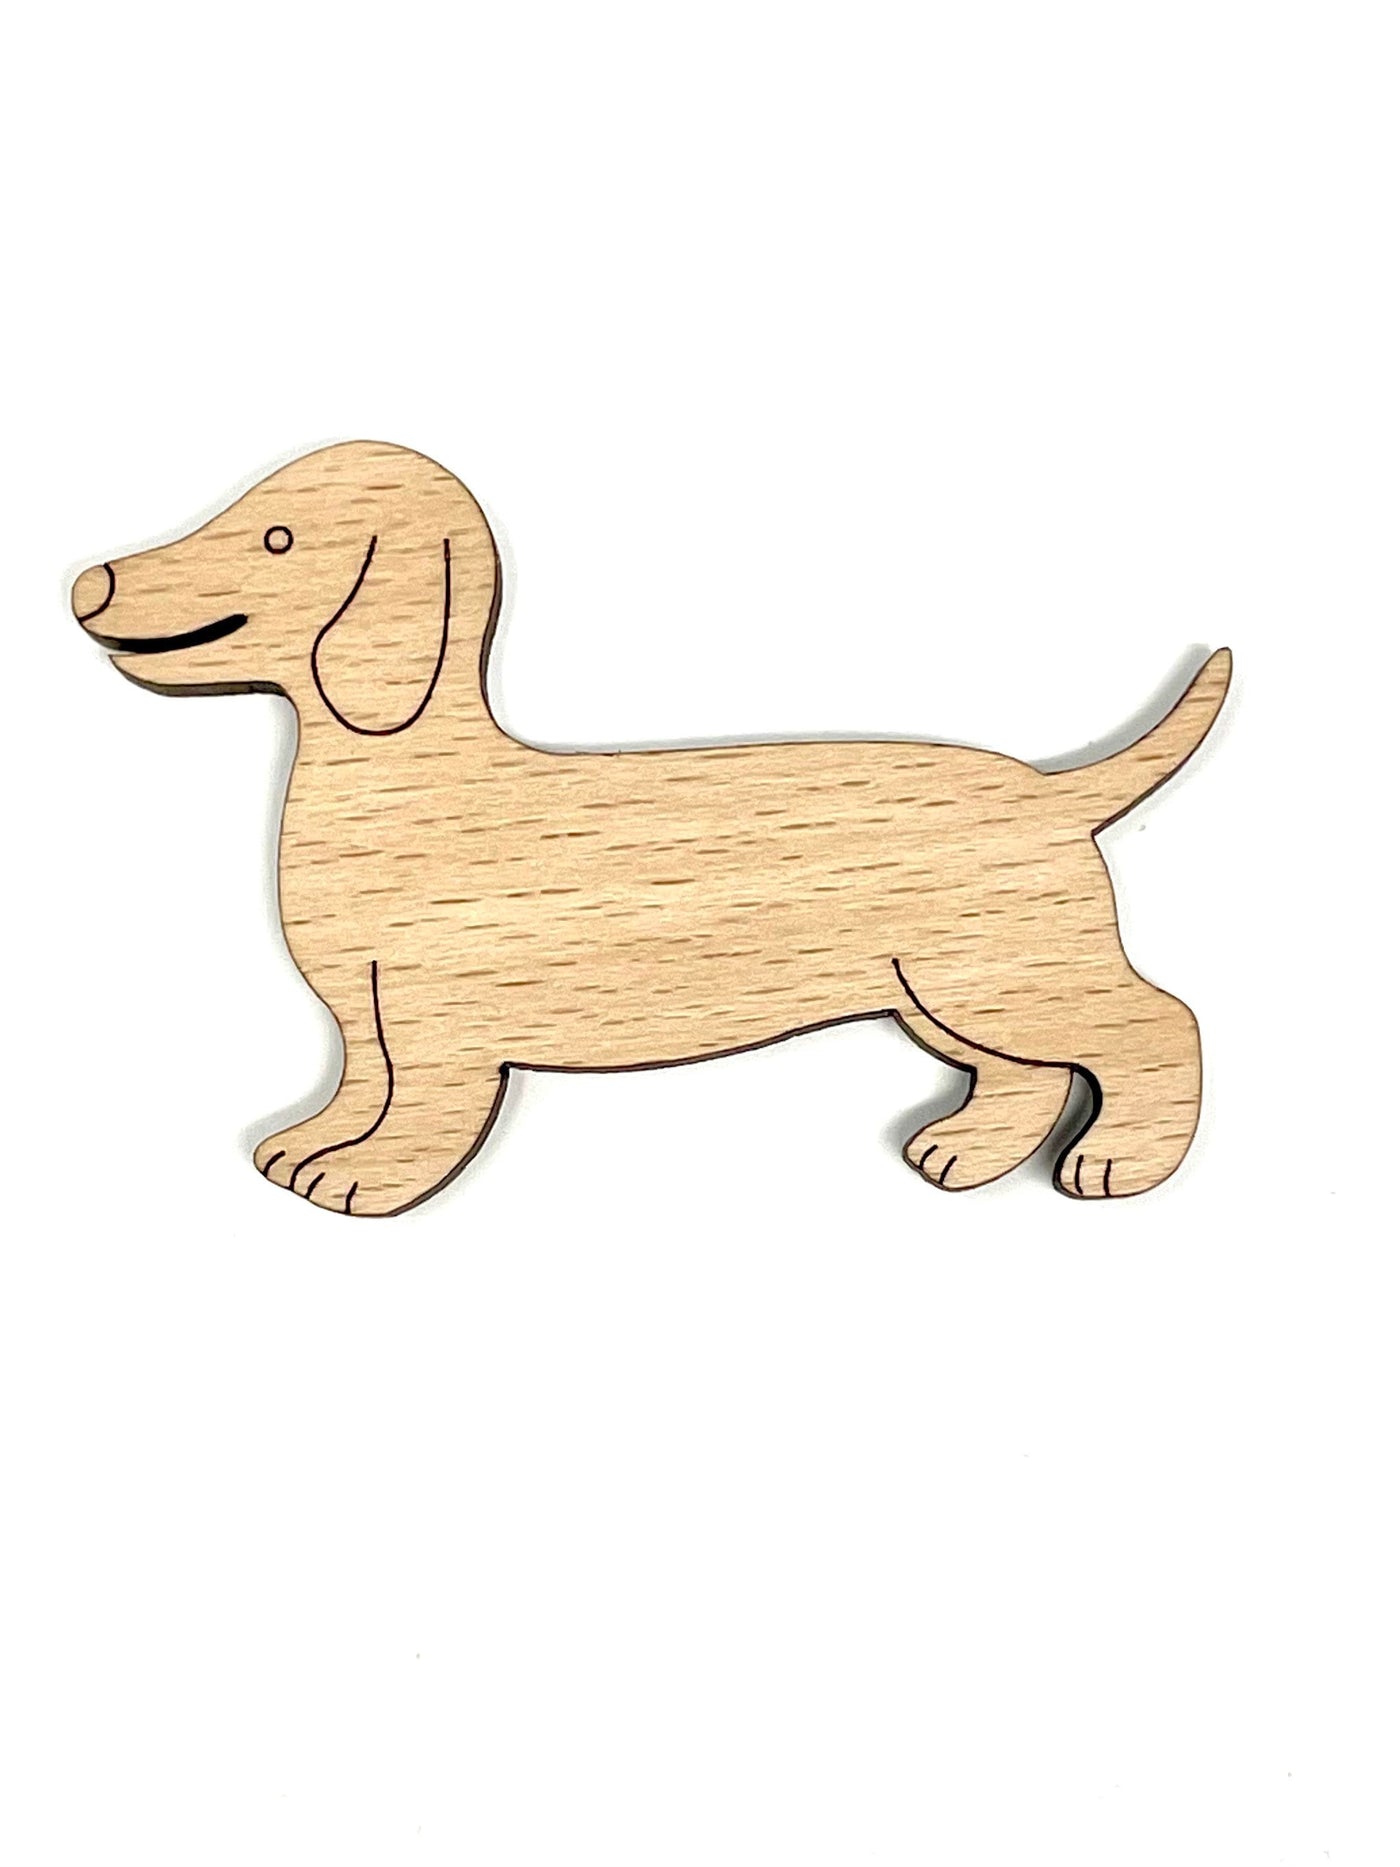 Premium Dachshund bobbins (set of 12) for cross stitch and embroidery